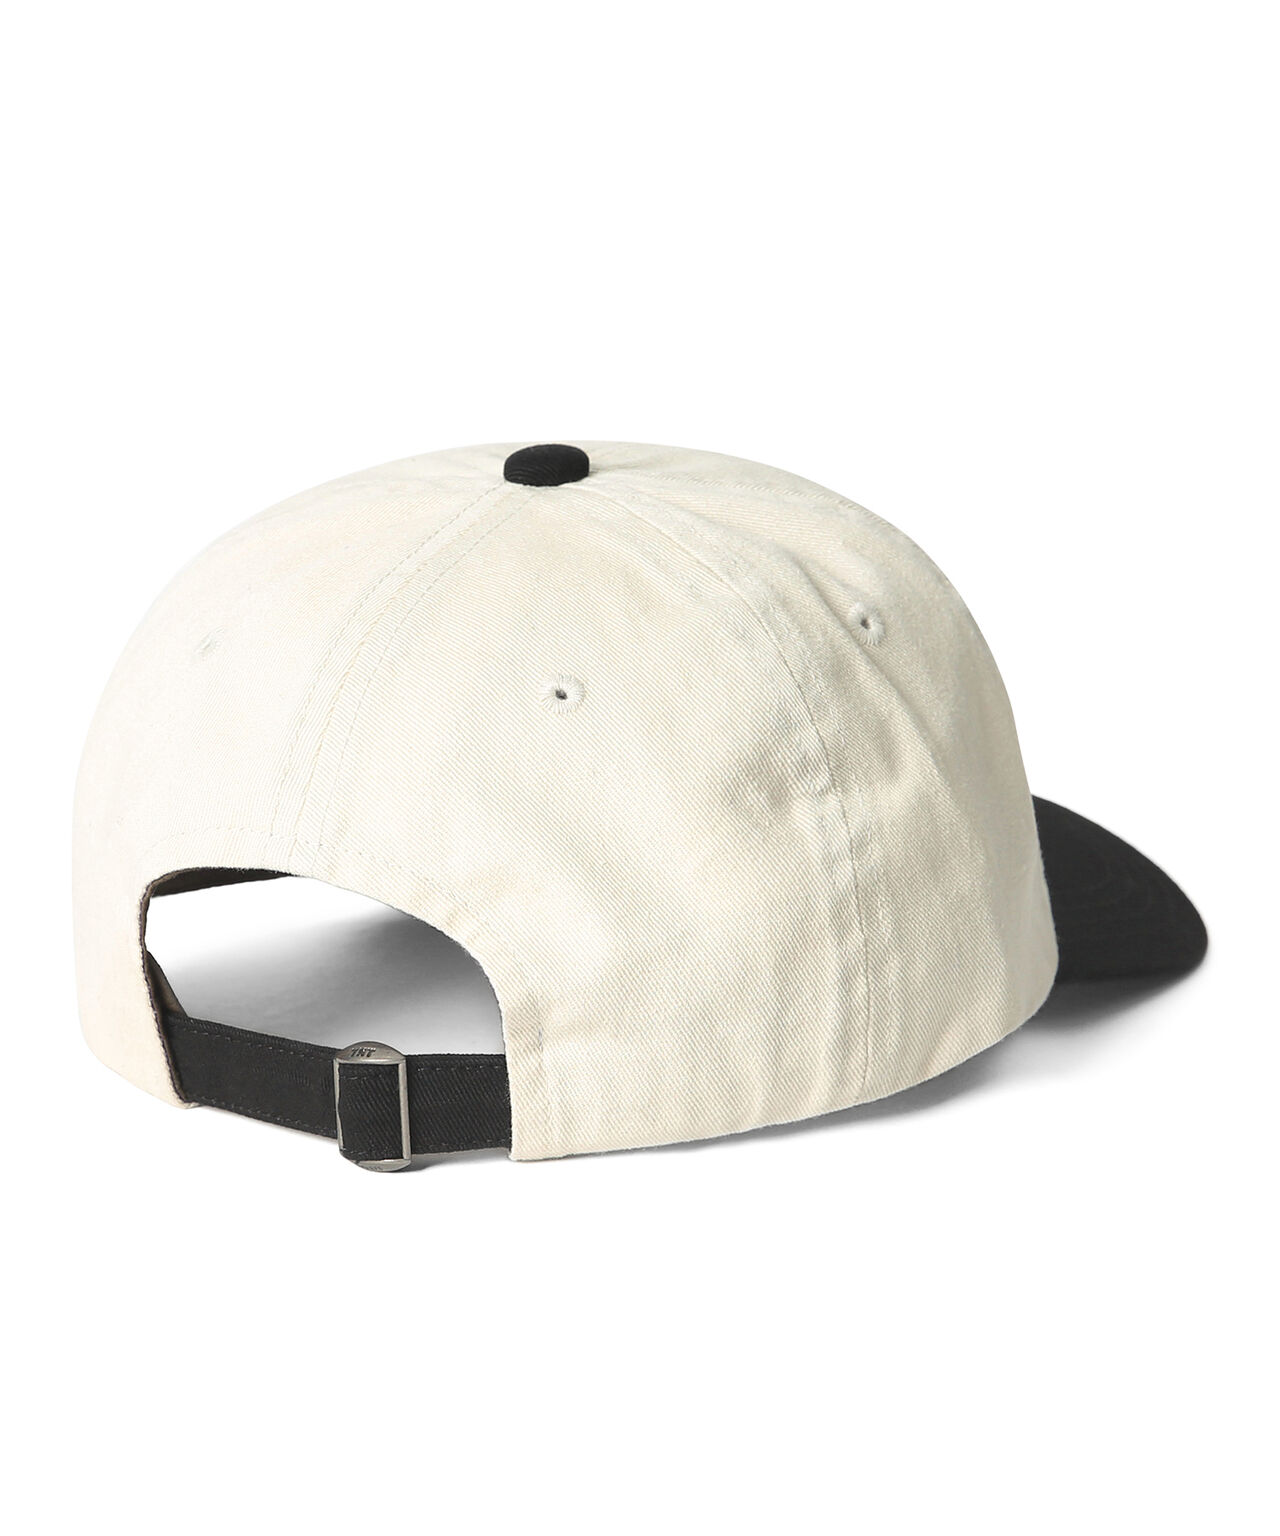 TNT BF Cap,White, large image number 2